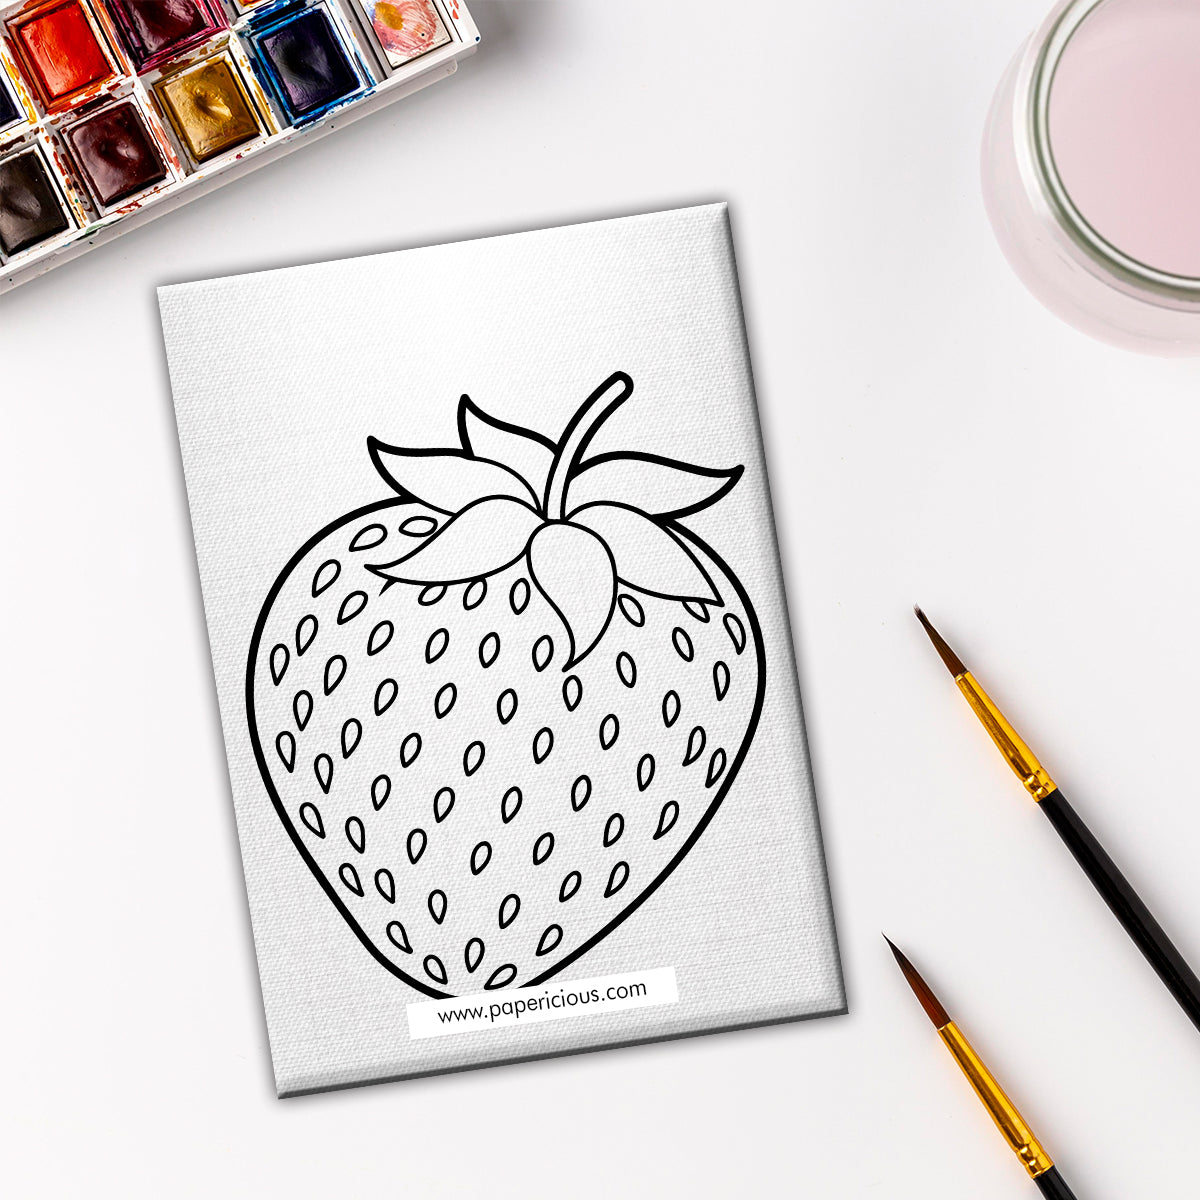 Pre Marked DIY Canvas - Fruits - Style 2